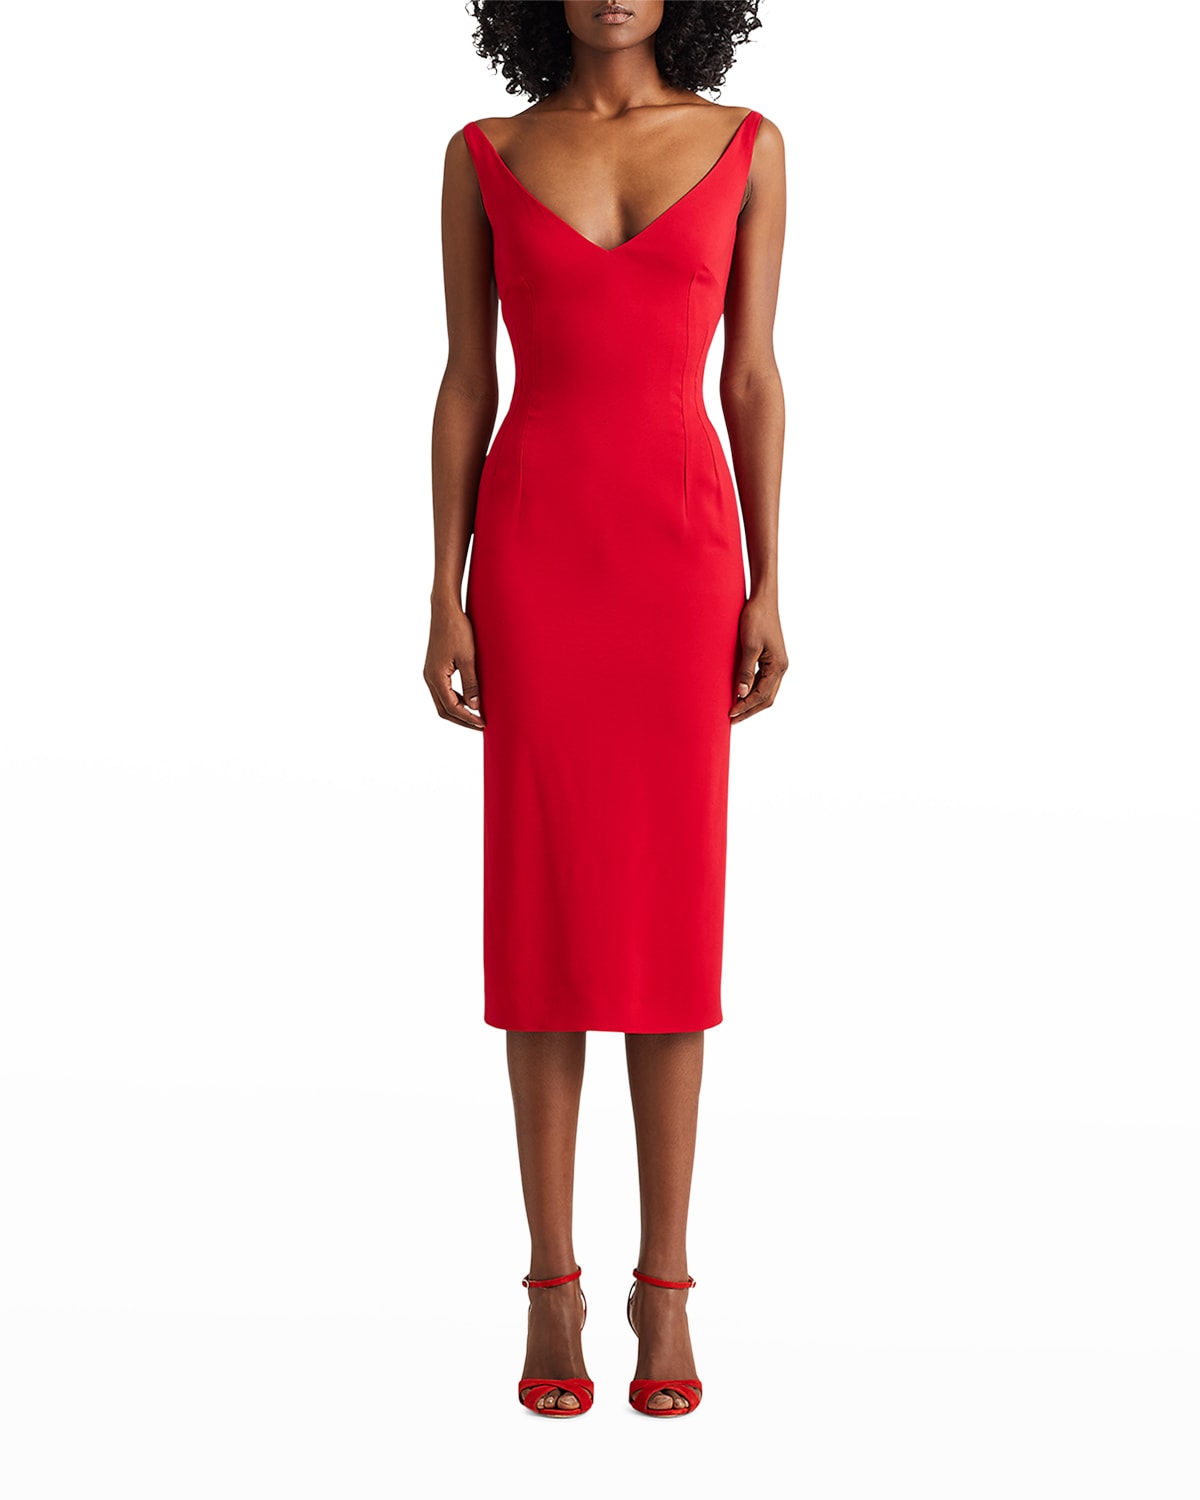 Burgess Sleeveless Cocktail Dress In Bright Red